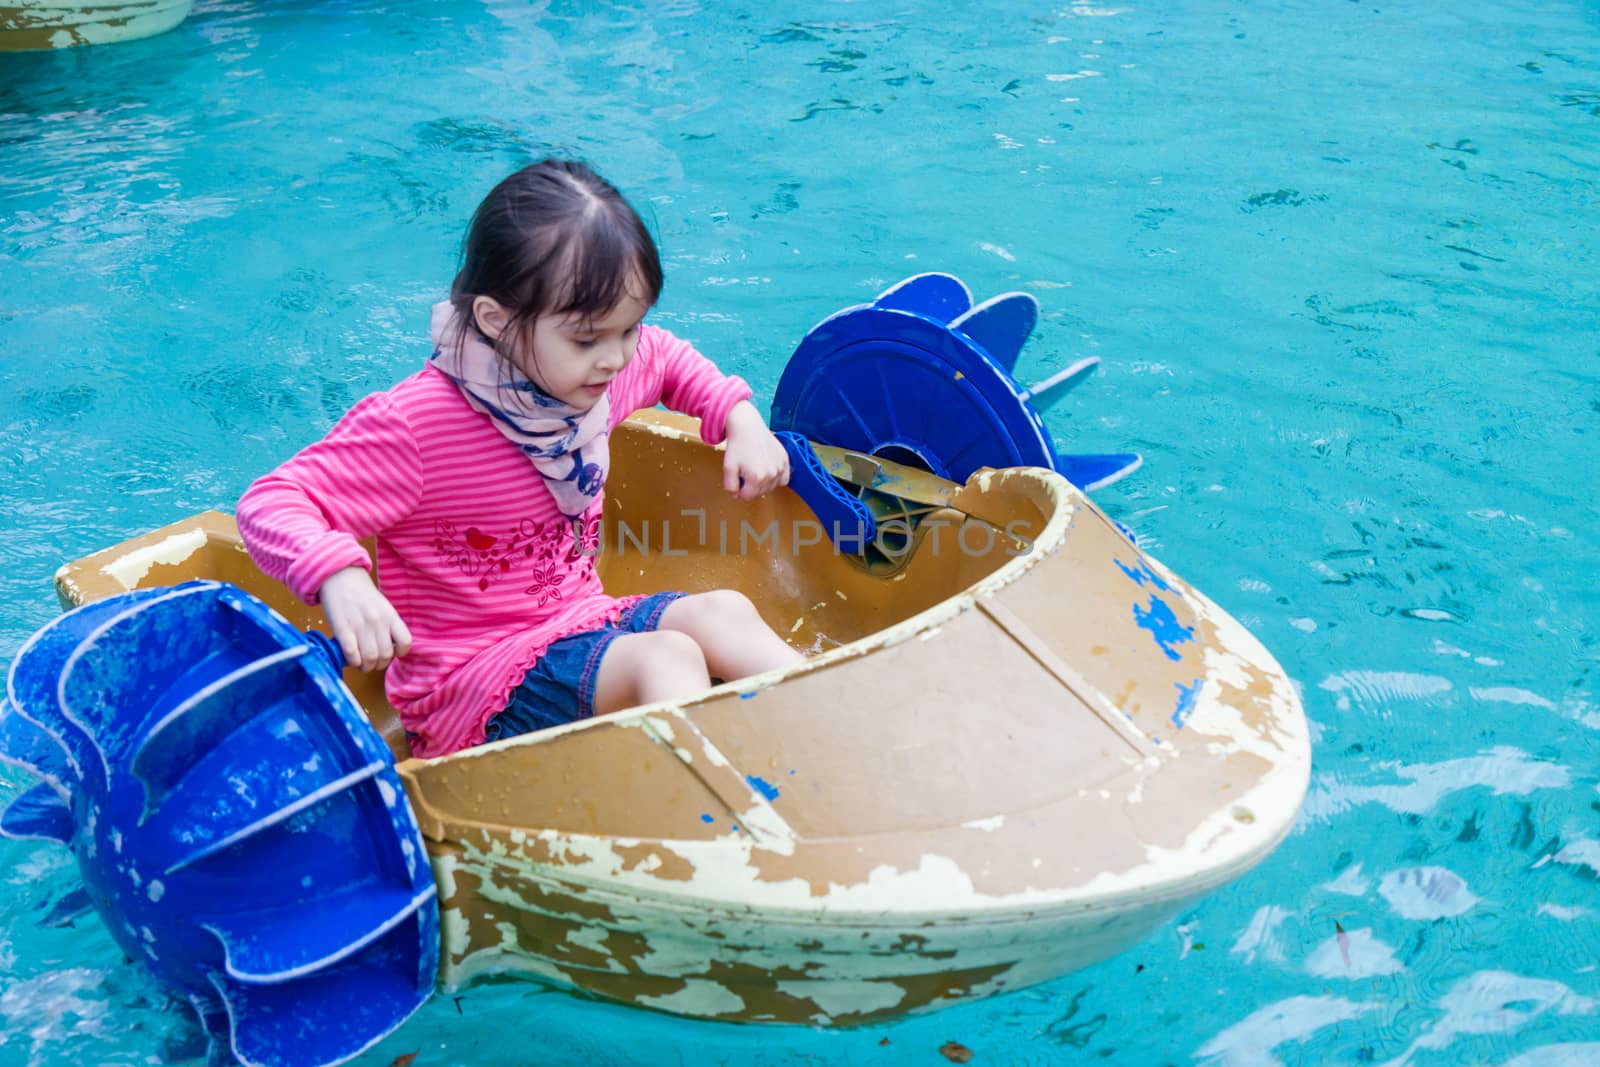 Young girl in paddle boat by imagesbykenny